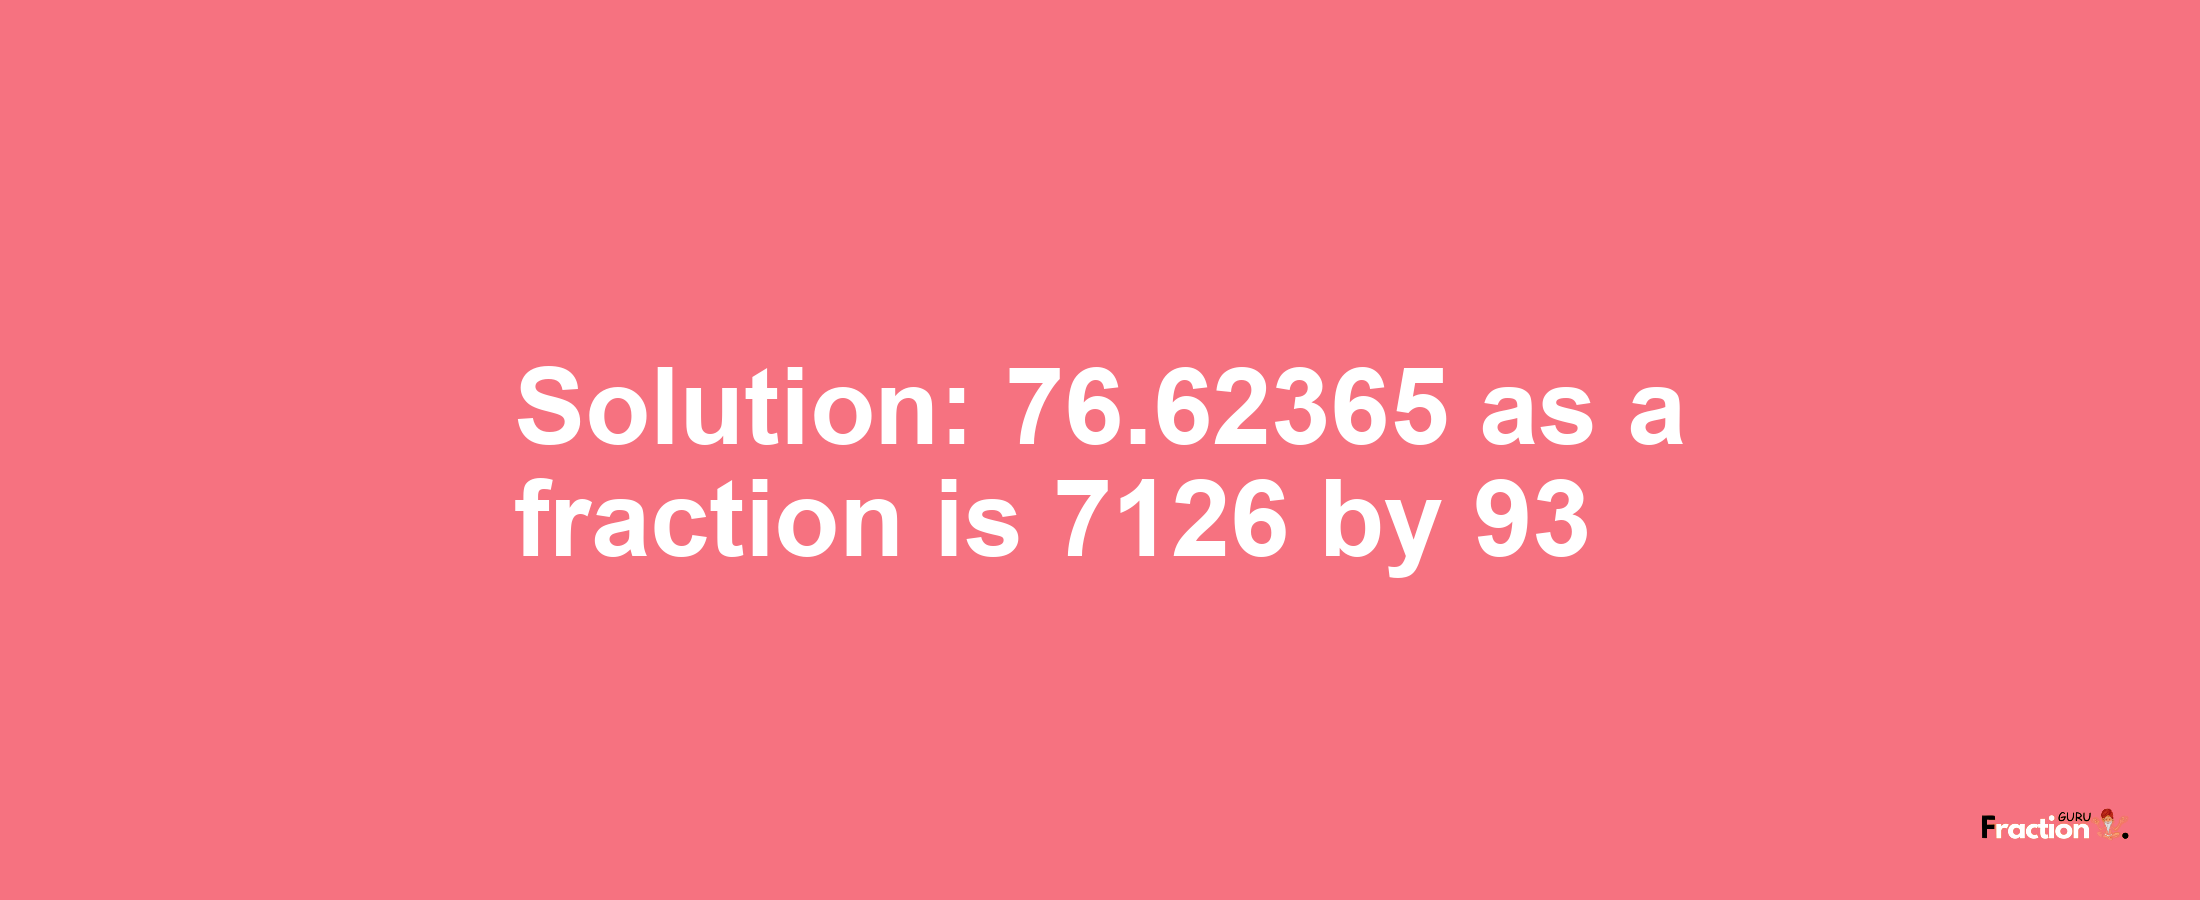 Solution:76.62365 as a fraction is 7126/93